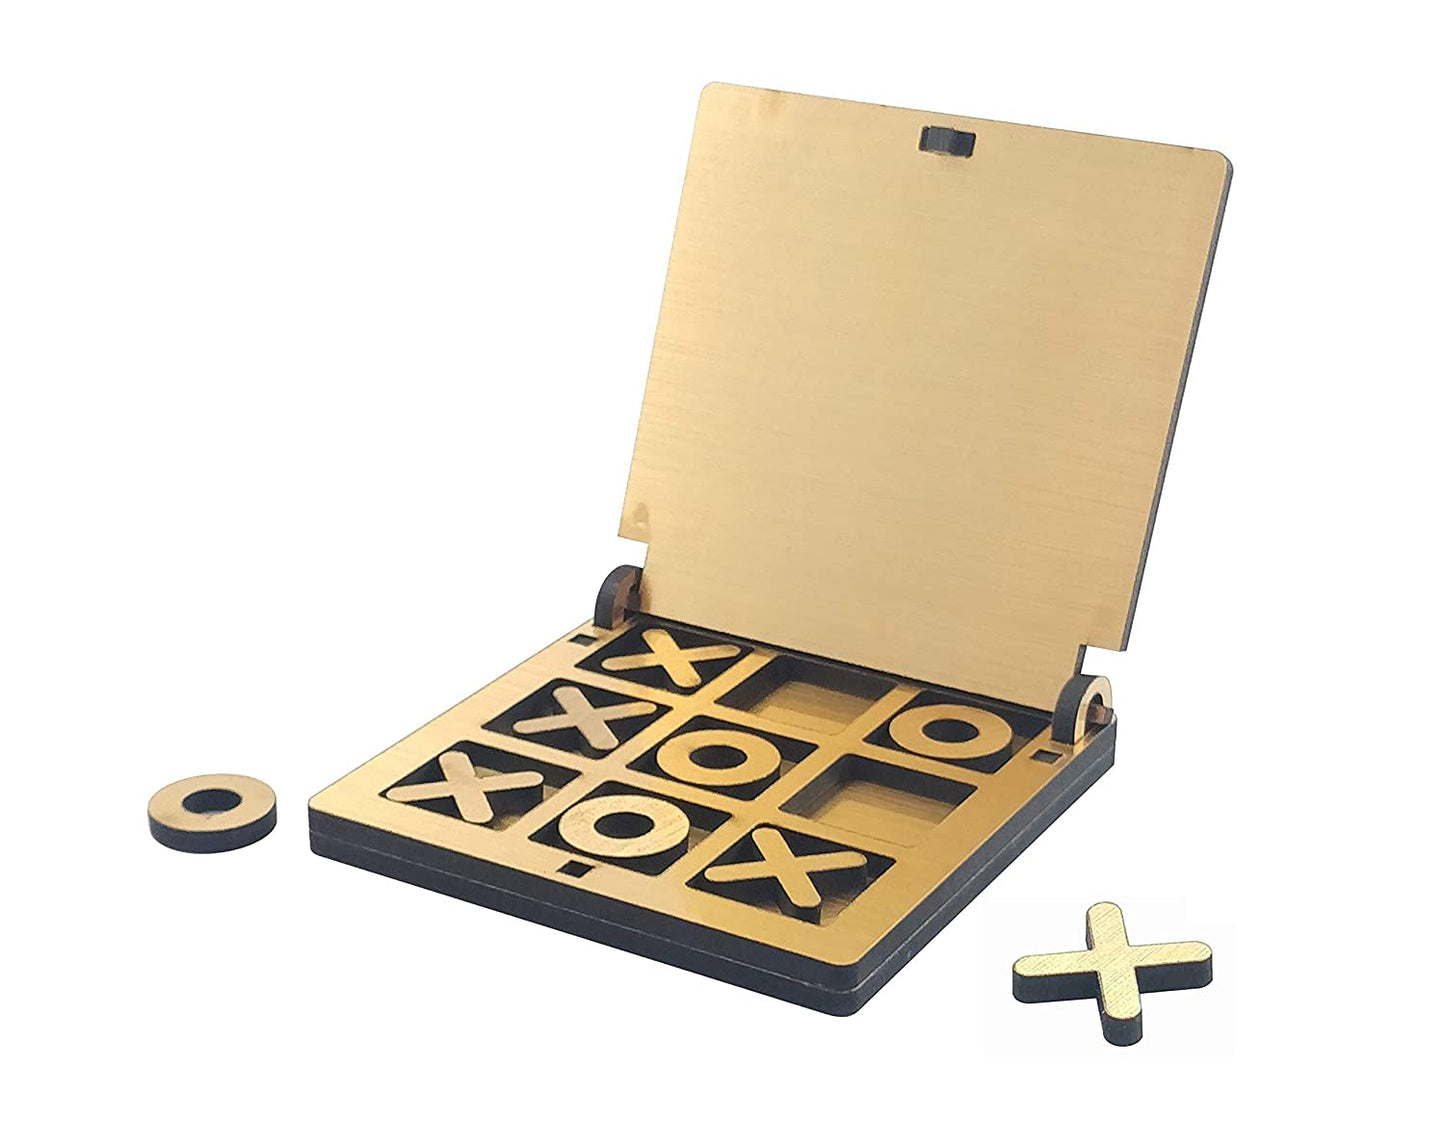 Play Tic Tac Toe, XOX Game, Tic Tac Toe, Wooden Tic Tac Toe Portable Game For Kids And Adults